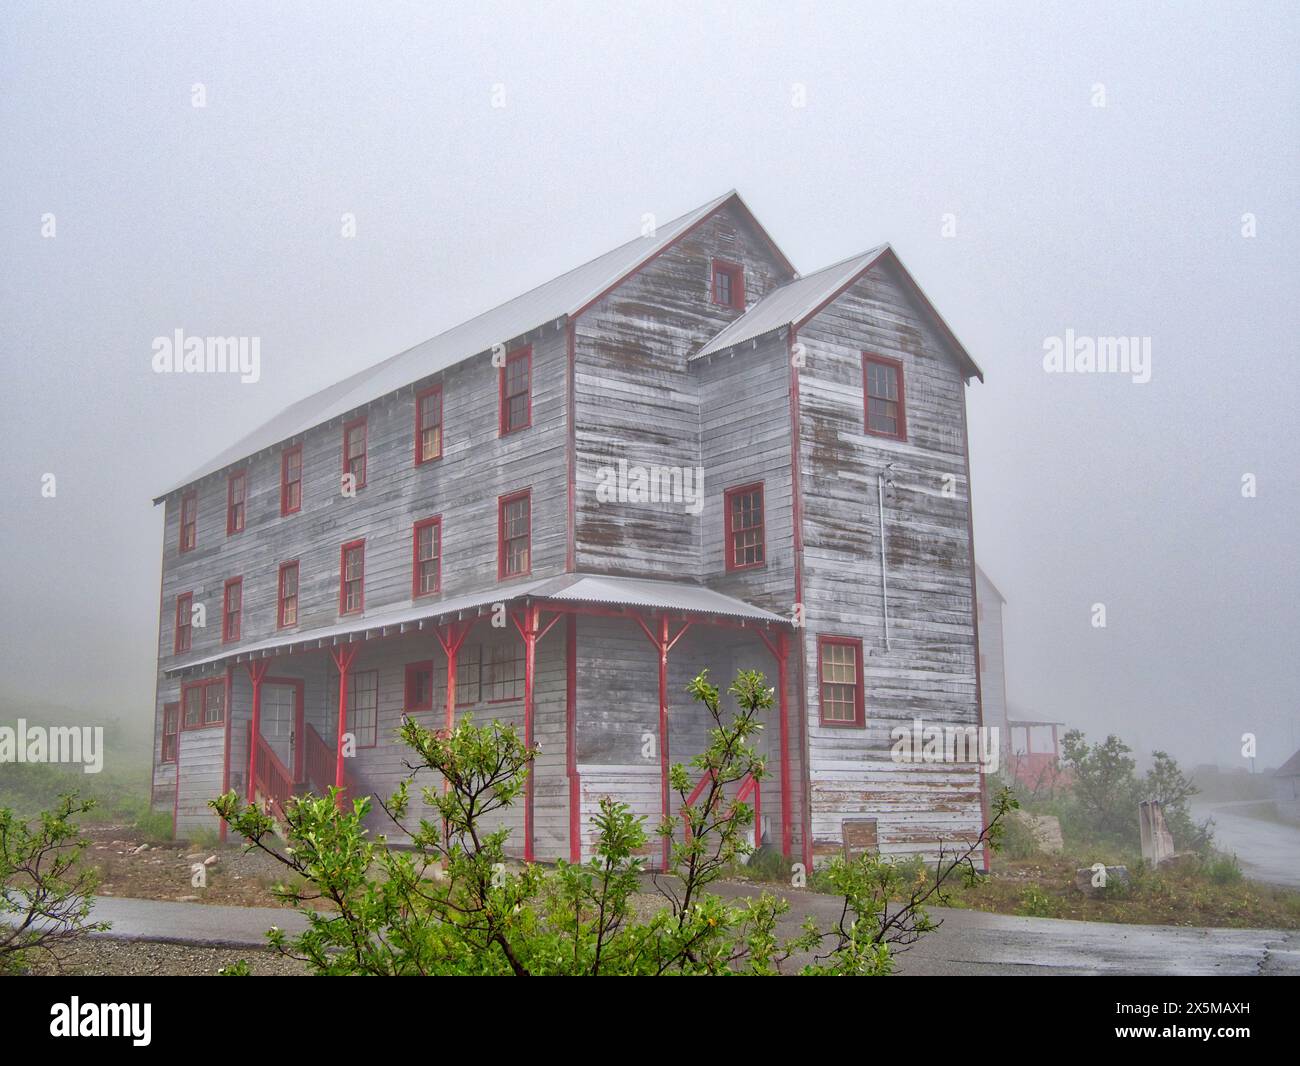 USA, Alaska. No. 1 bunkhouse at the Independence Mine State Historical Park listed on the National Register of Historic Places is a former gold mining Stock Photo